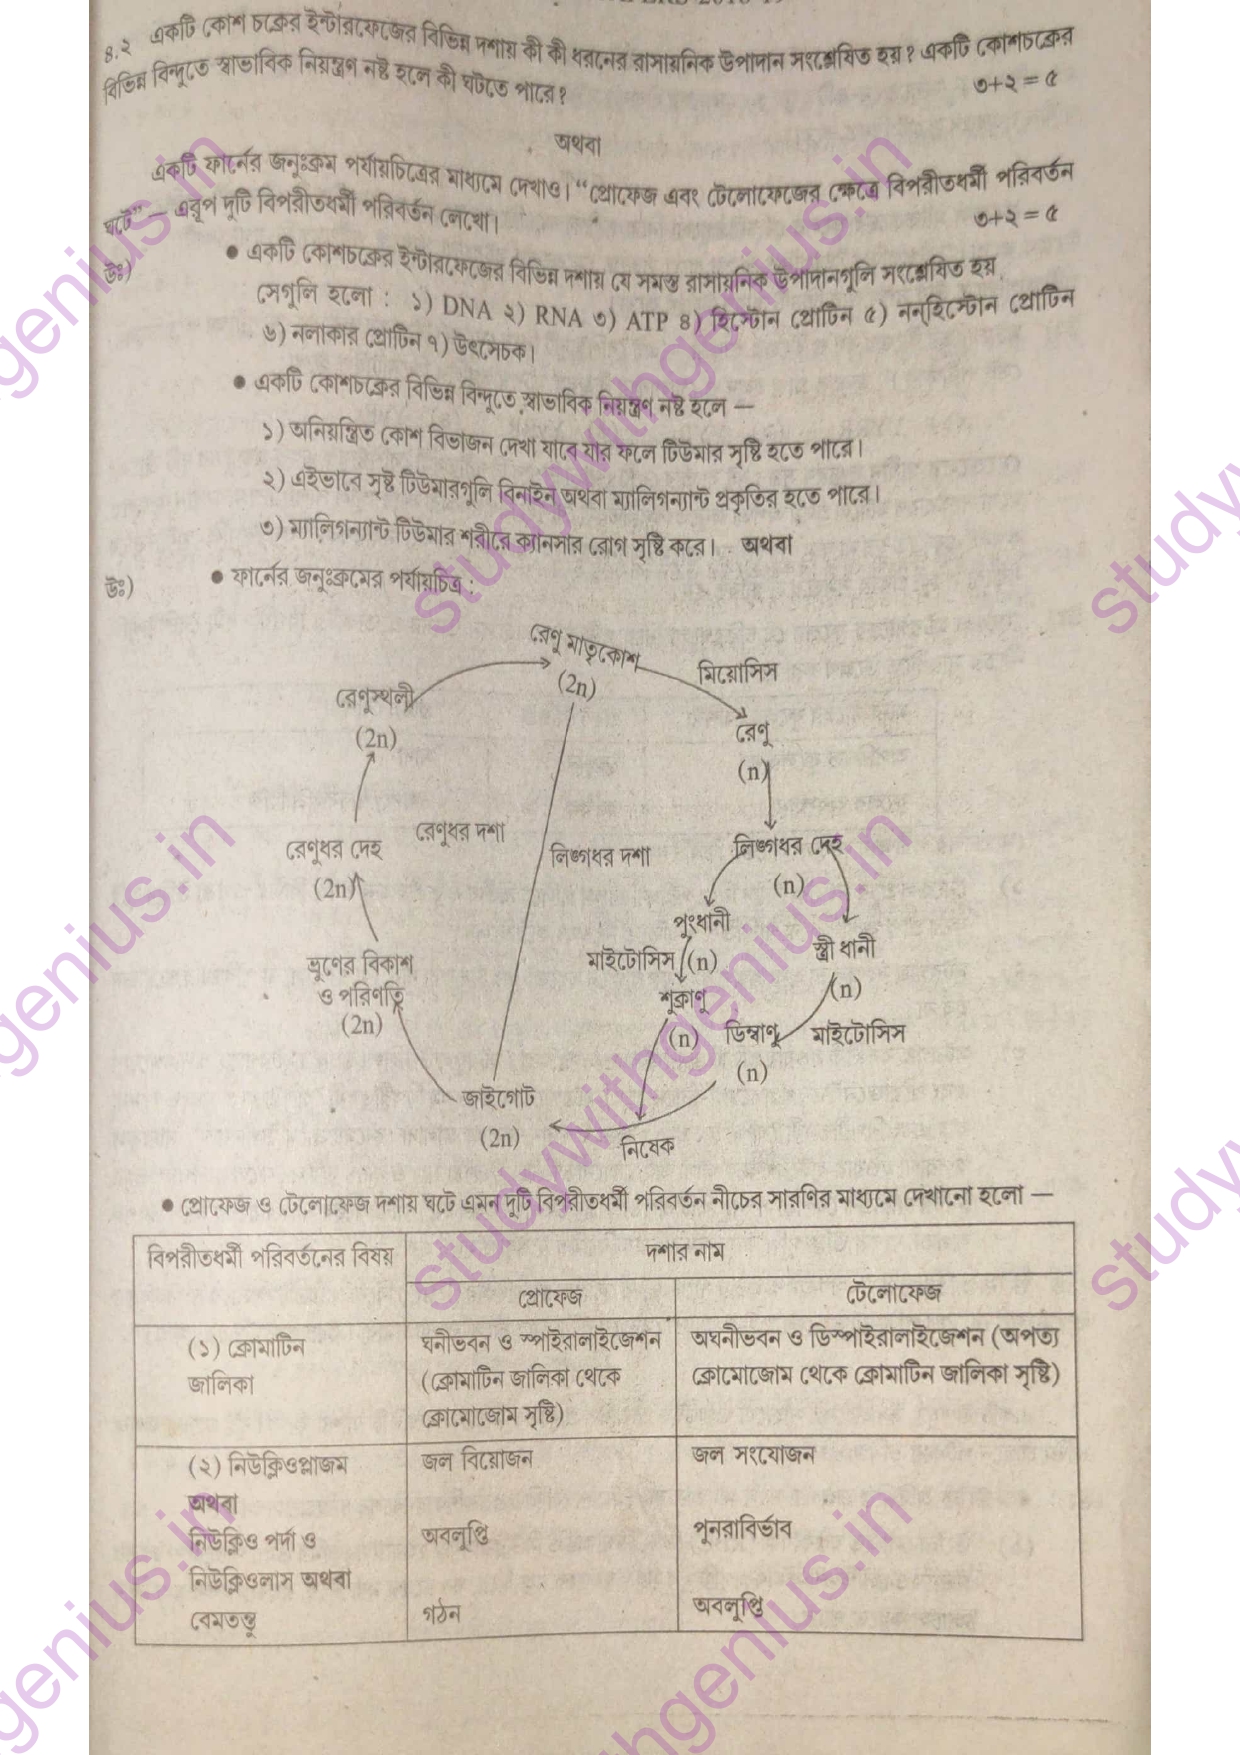 WBBSE Madhyamik Life Science Subject Question Papers Bengali Medium 2018